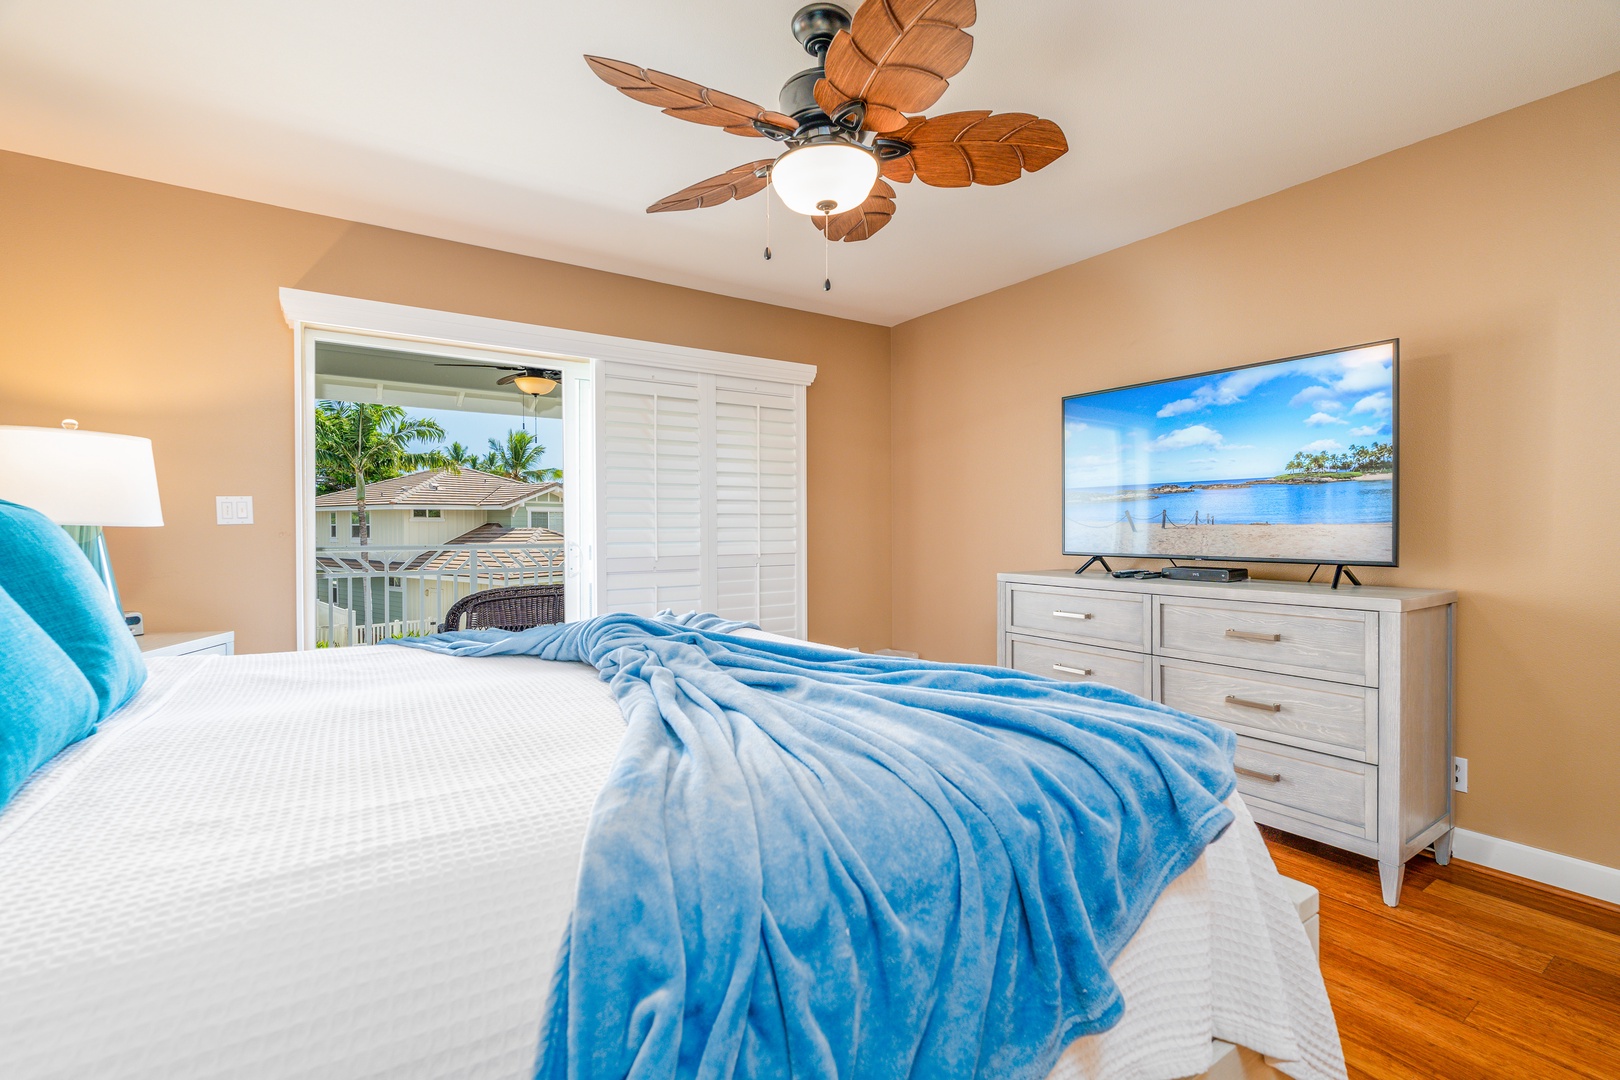 Kapolei Vacation Rentals, Ko Olina Kai 1081C - Relax and breathe in island air in the primary guest bedroom upstairs.